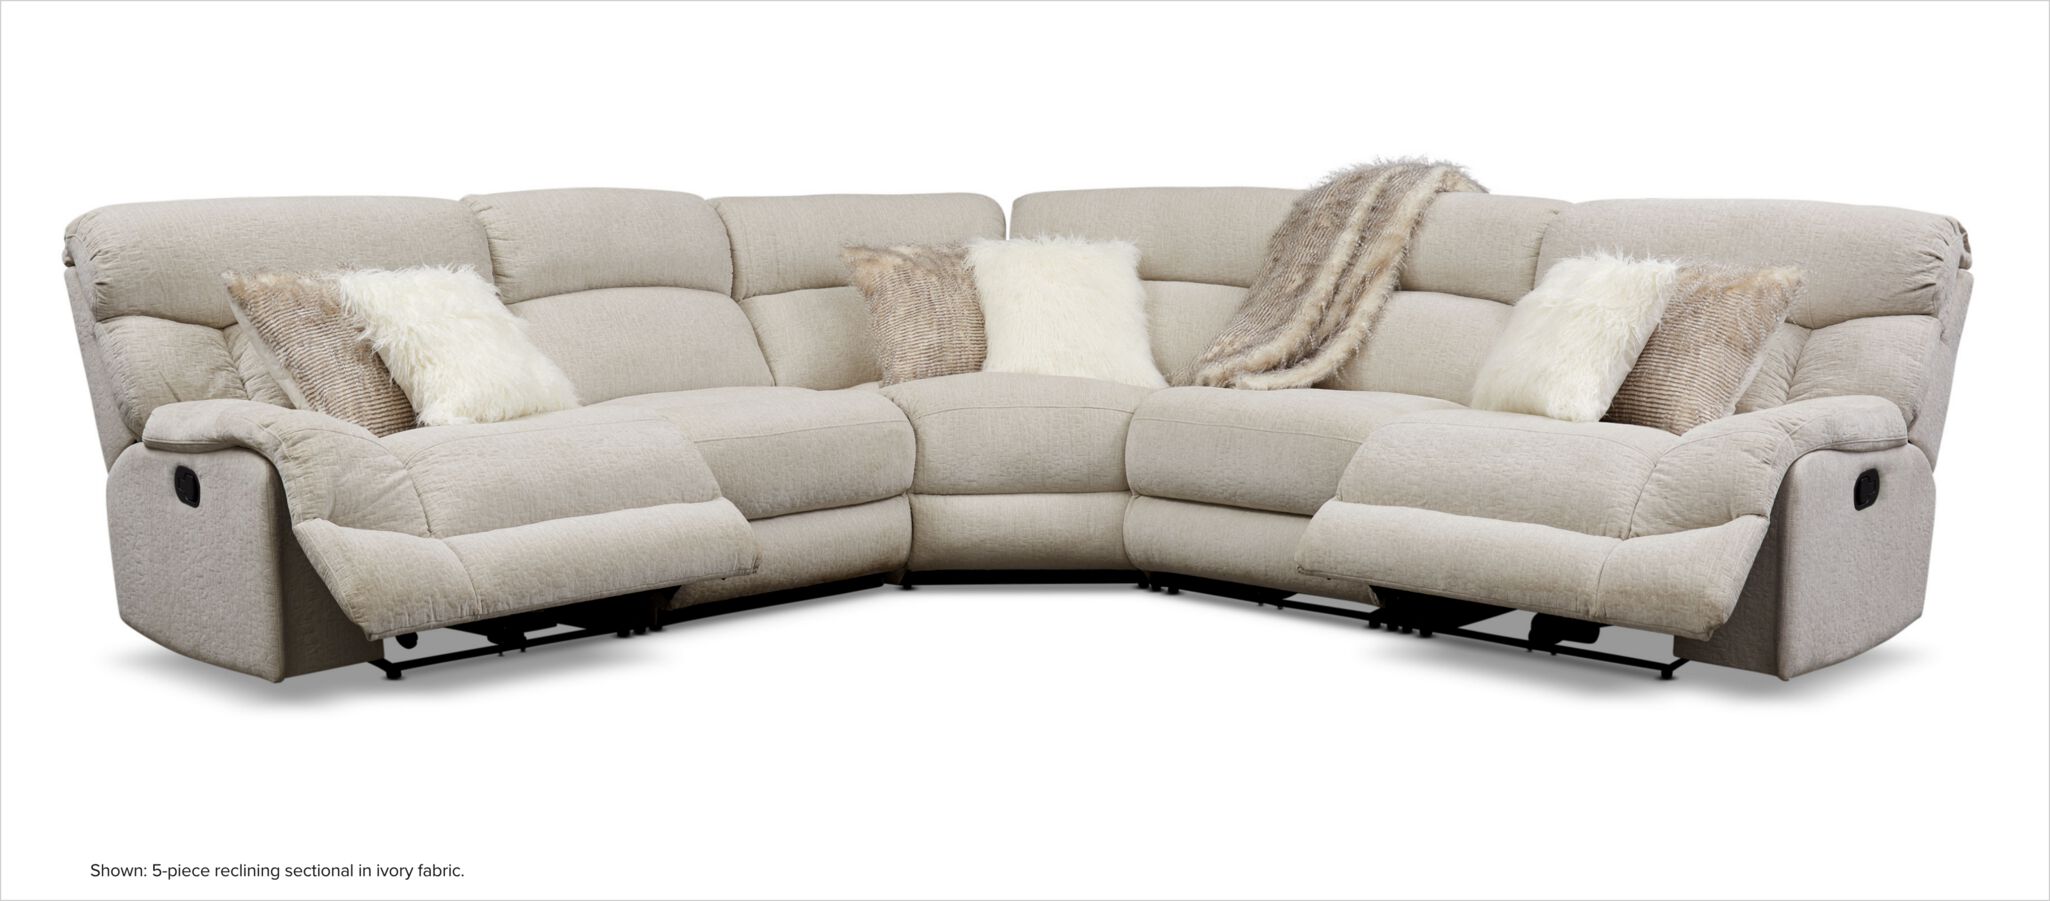 Wave 5-piece reclining sectional in ivory fabric.